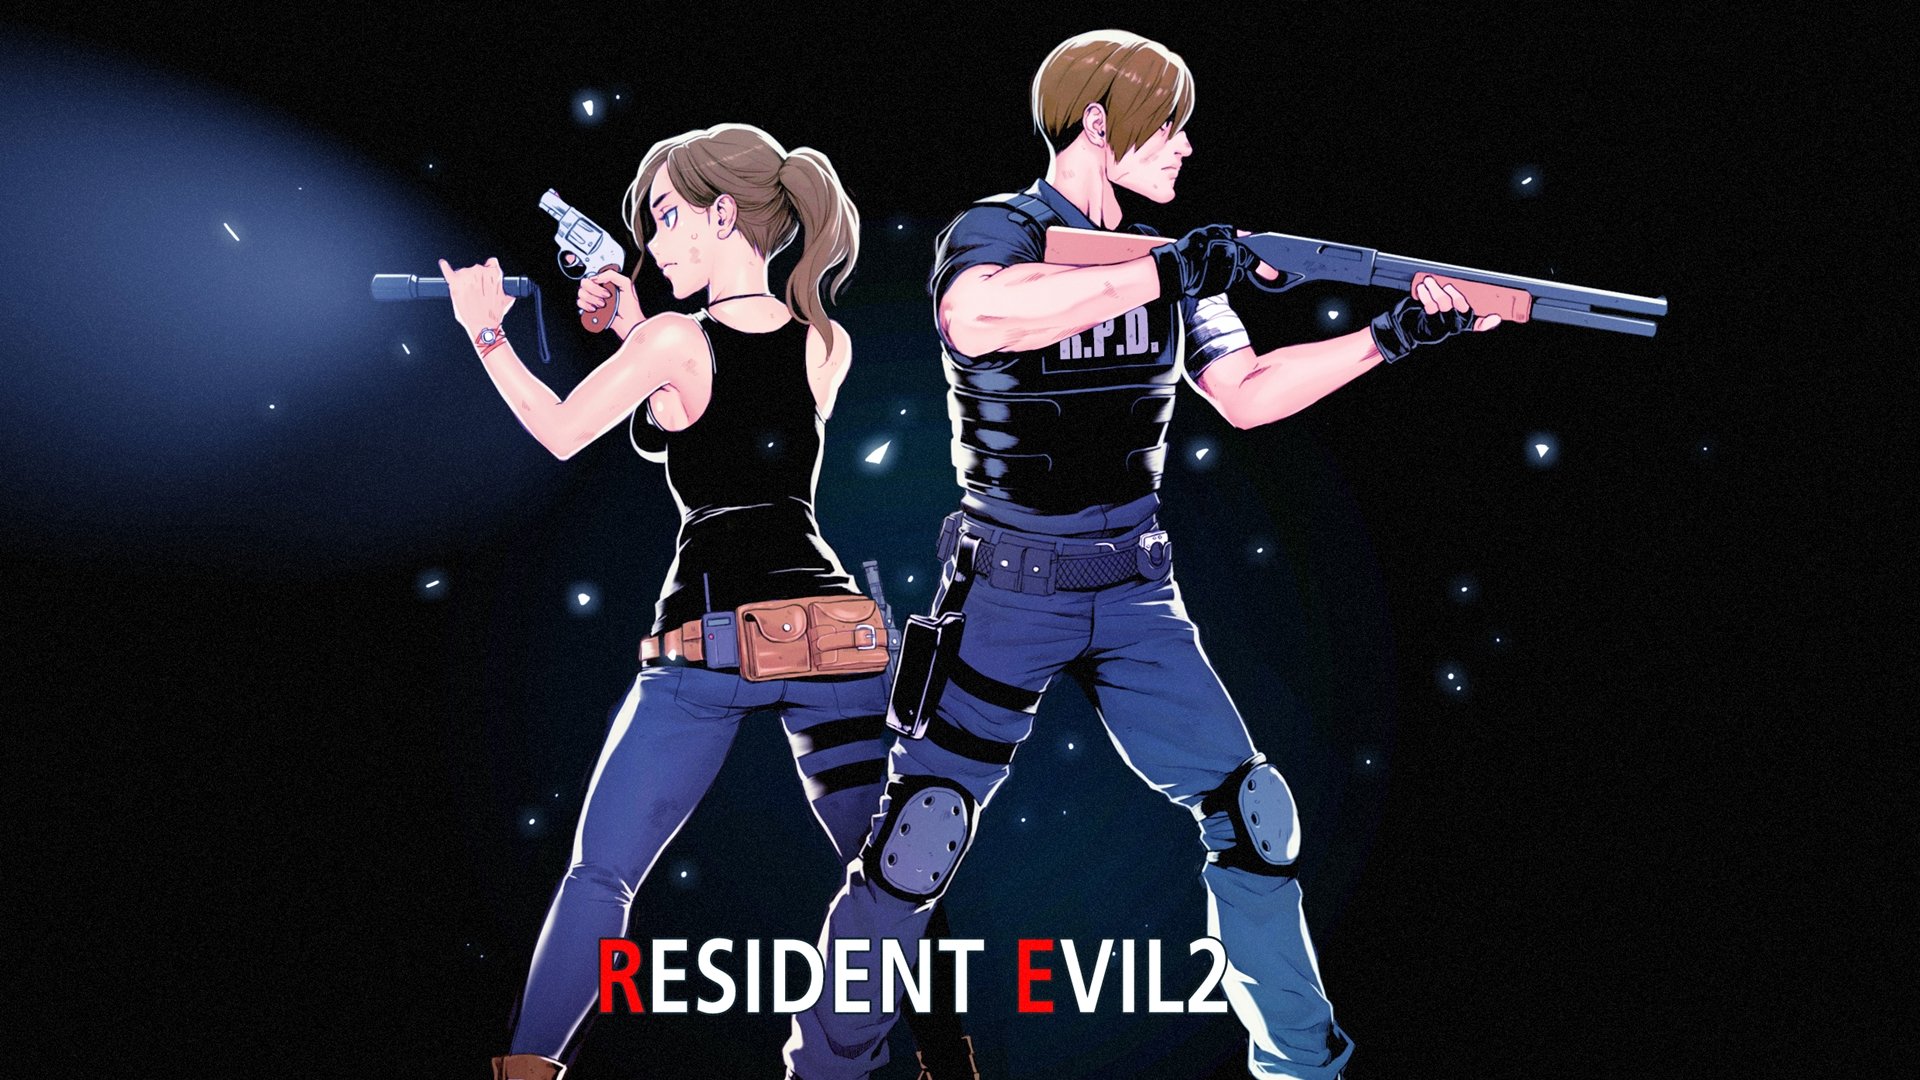 Claire Redfield, Leon S. Kennedy, Resident Evil 2 Wallpaper